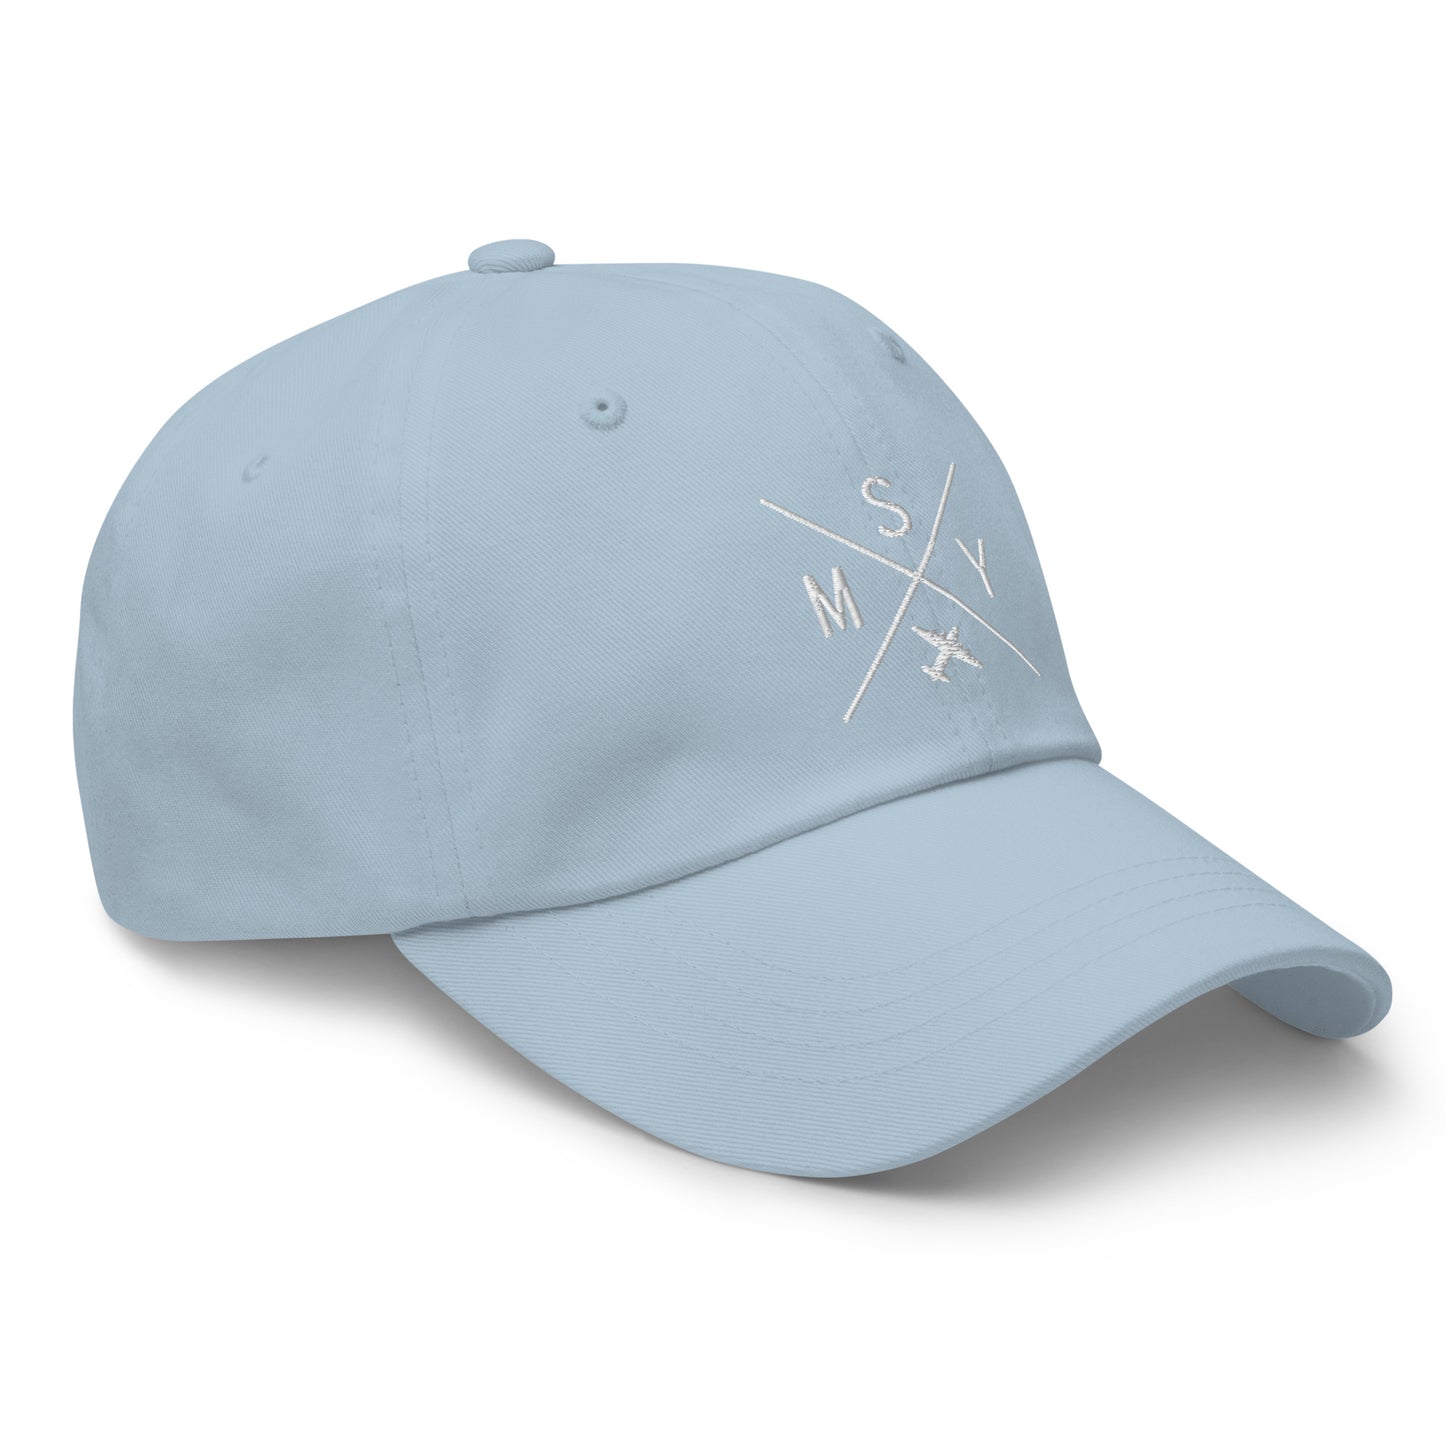 Crossed-X Dad Hat - White • MSY New Orleans • YHM Designs - Image 29